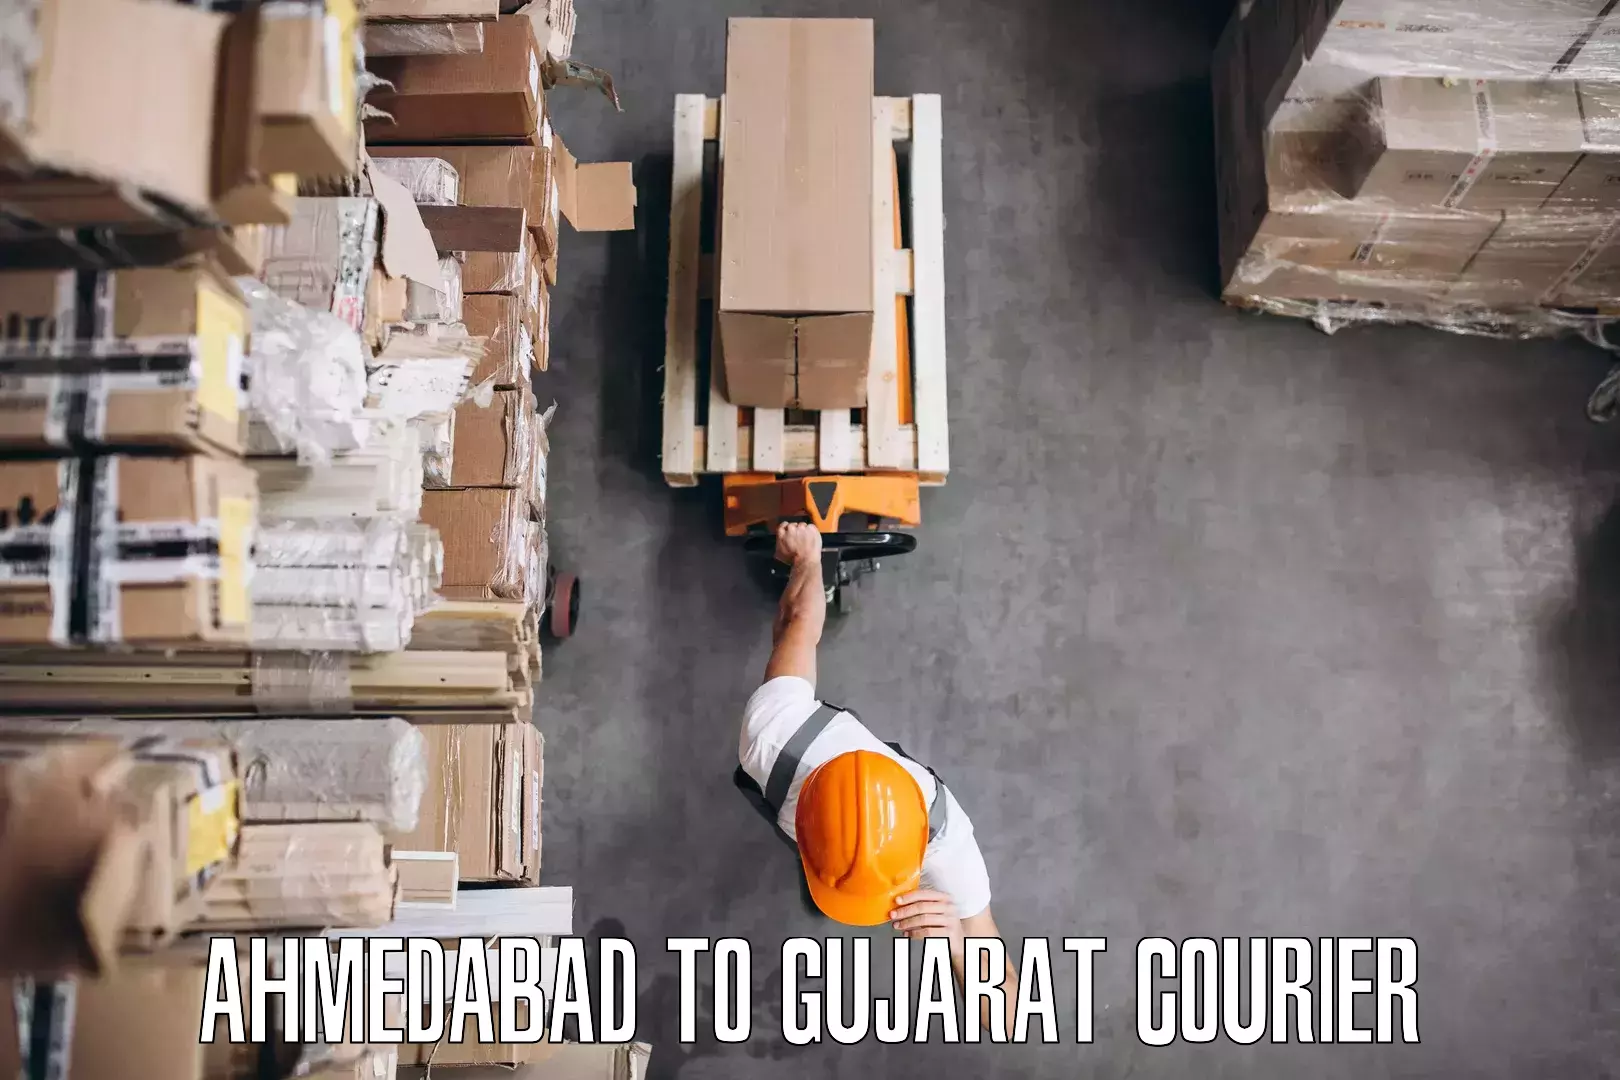 Furniture delivery service Ahmedabad to Veraval